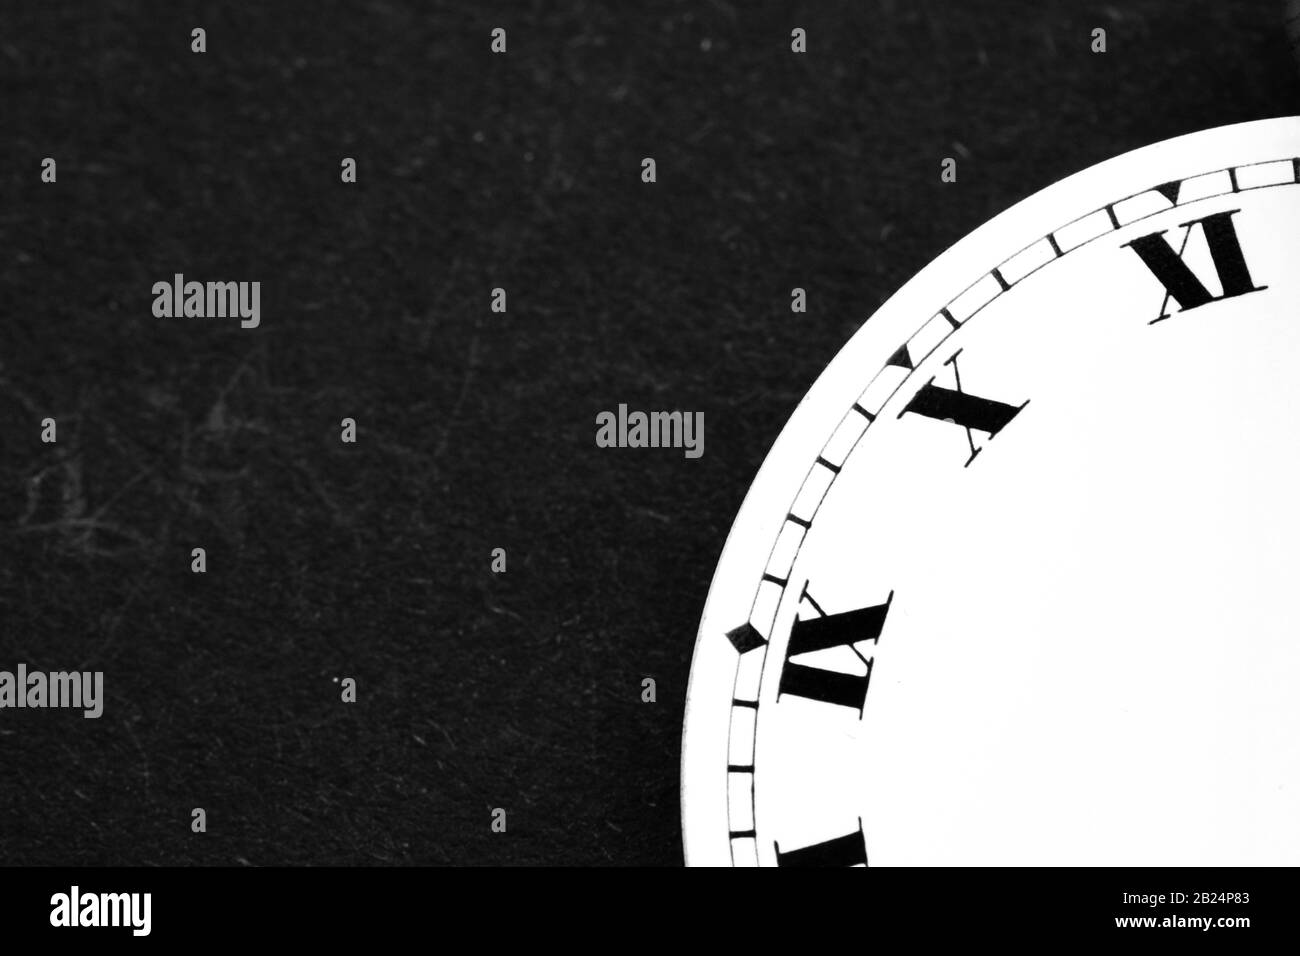 Black and White Watch face Stock Photo